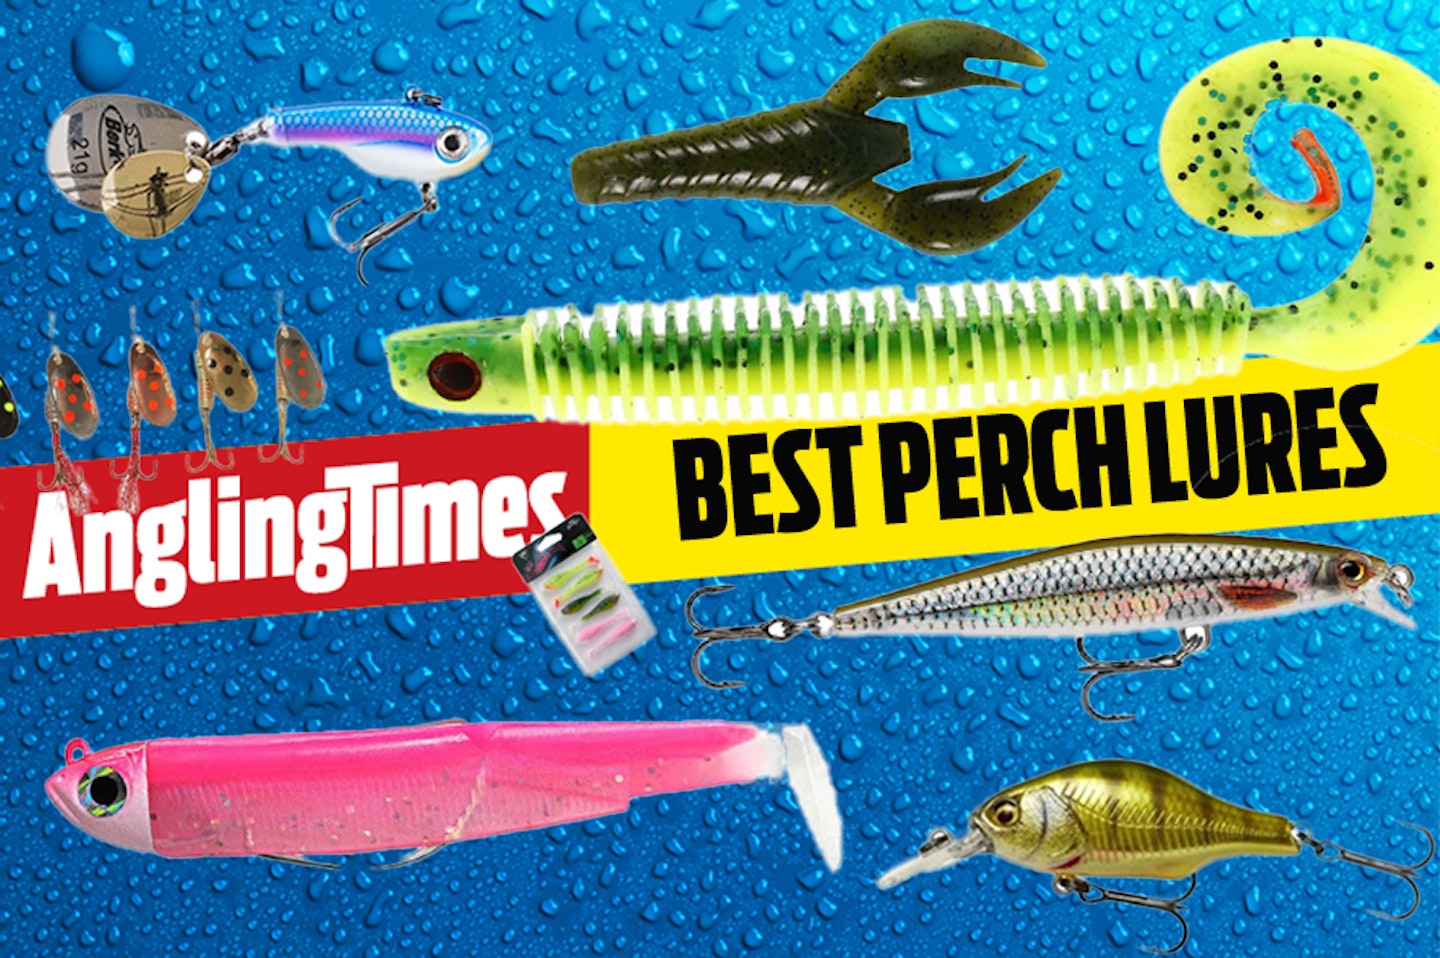 Prime Lures - Buying Guide